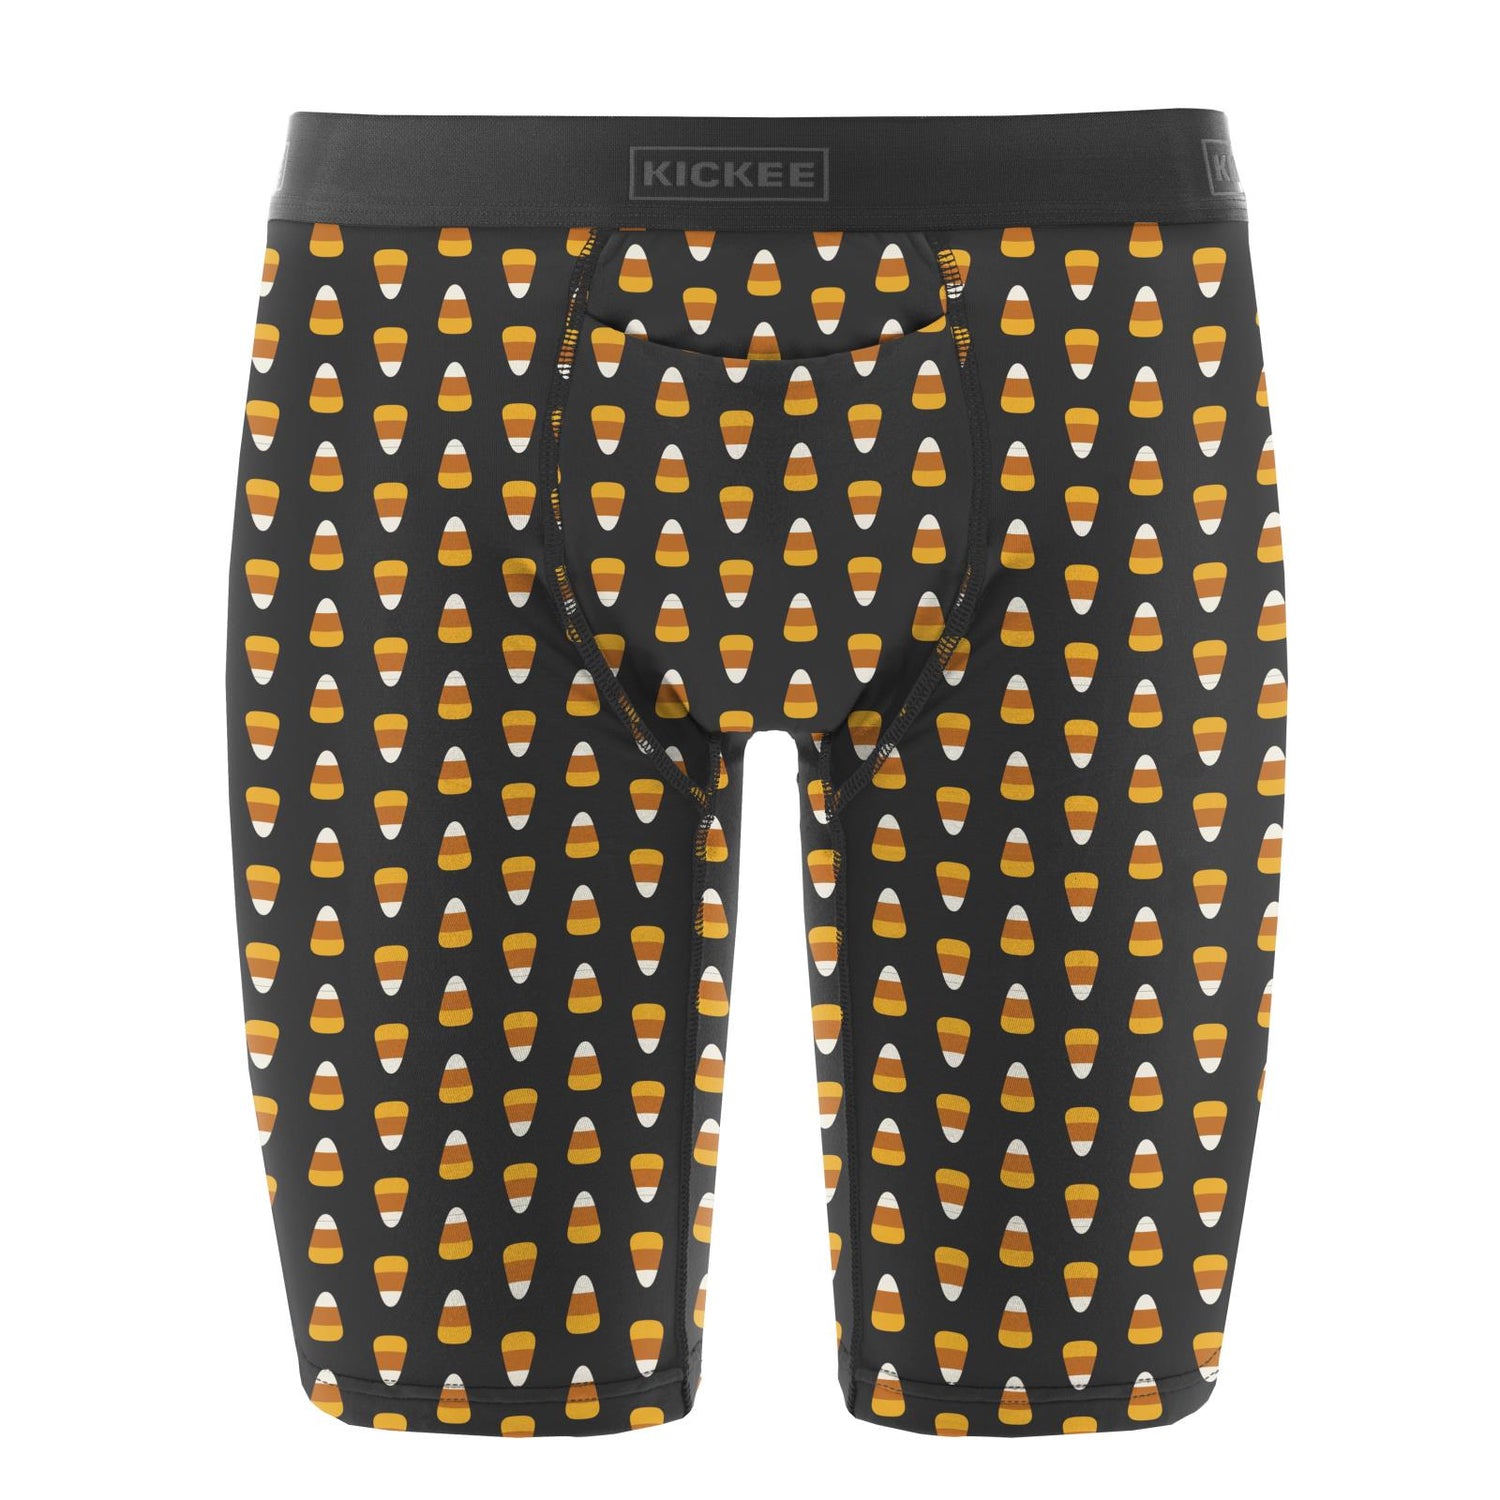 Men's Print Long Boxer Brief with Top Fly in Midnight Candy Corn